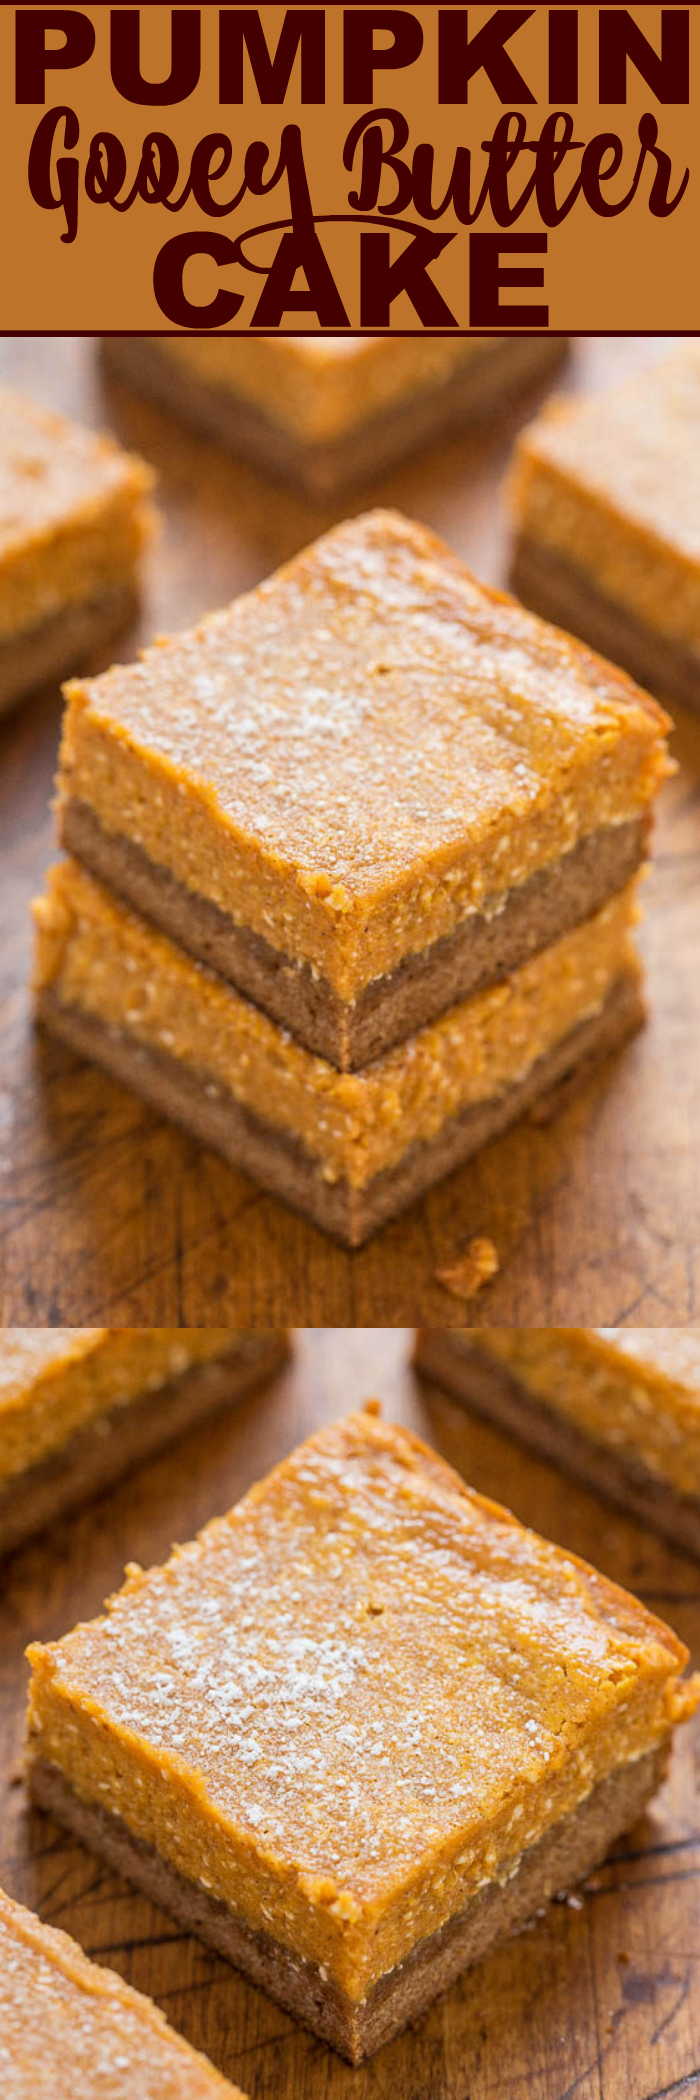 Pumpkin Gooey Butter Cake — Like a gooier, richer version of pumpkin pie with a spice cake crust!! Butter + cream cheese = lives up to its GOOEY name! Make it for Thanksgiving instead of pumpkin pie!!